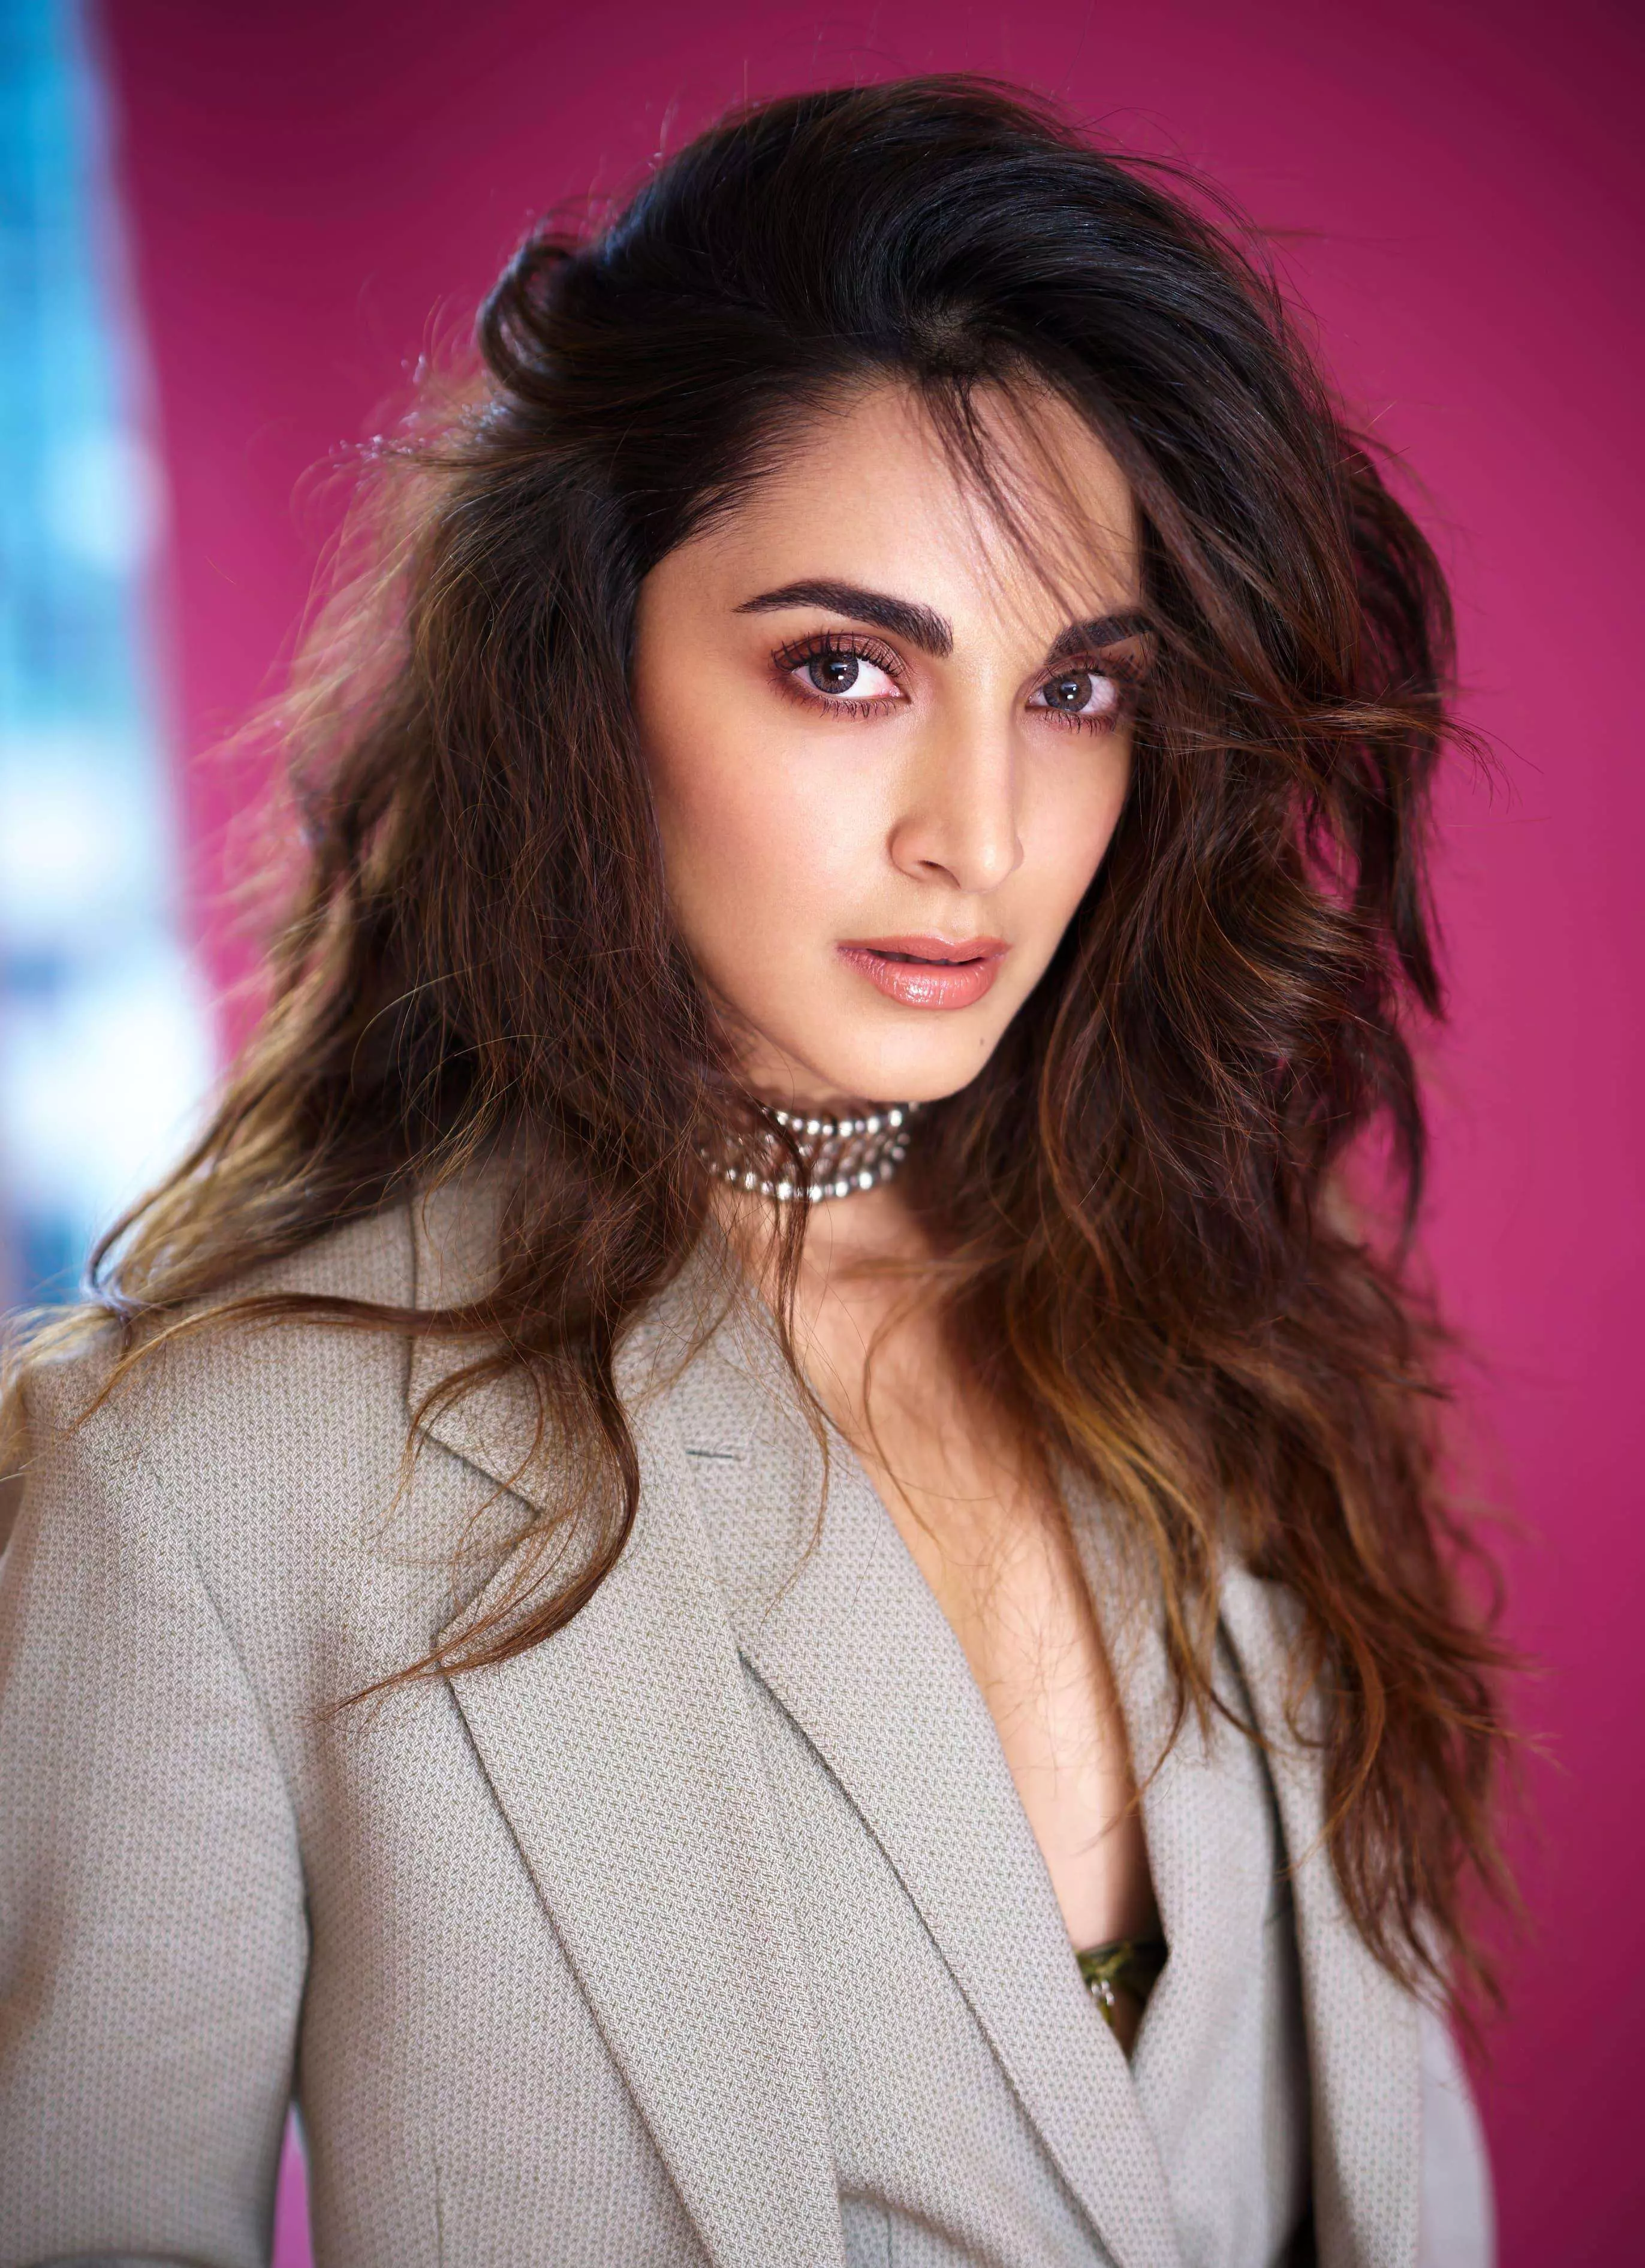 Kiara Advani shares insights and wisdom on balancing expectations and her learning in the entertainment industry